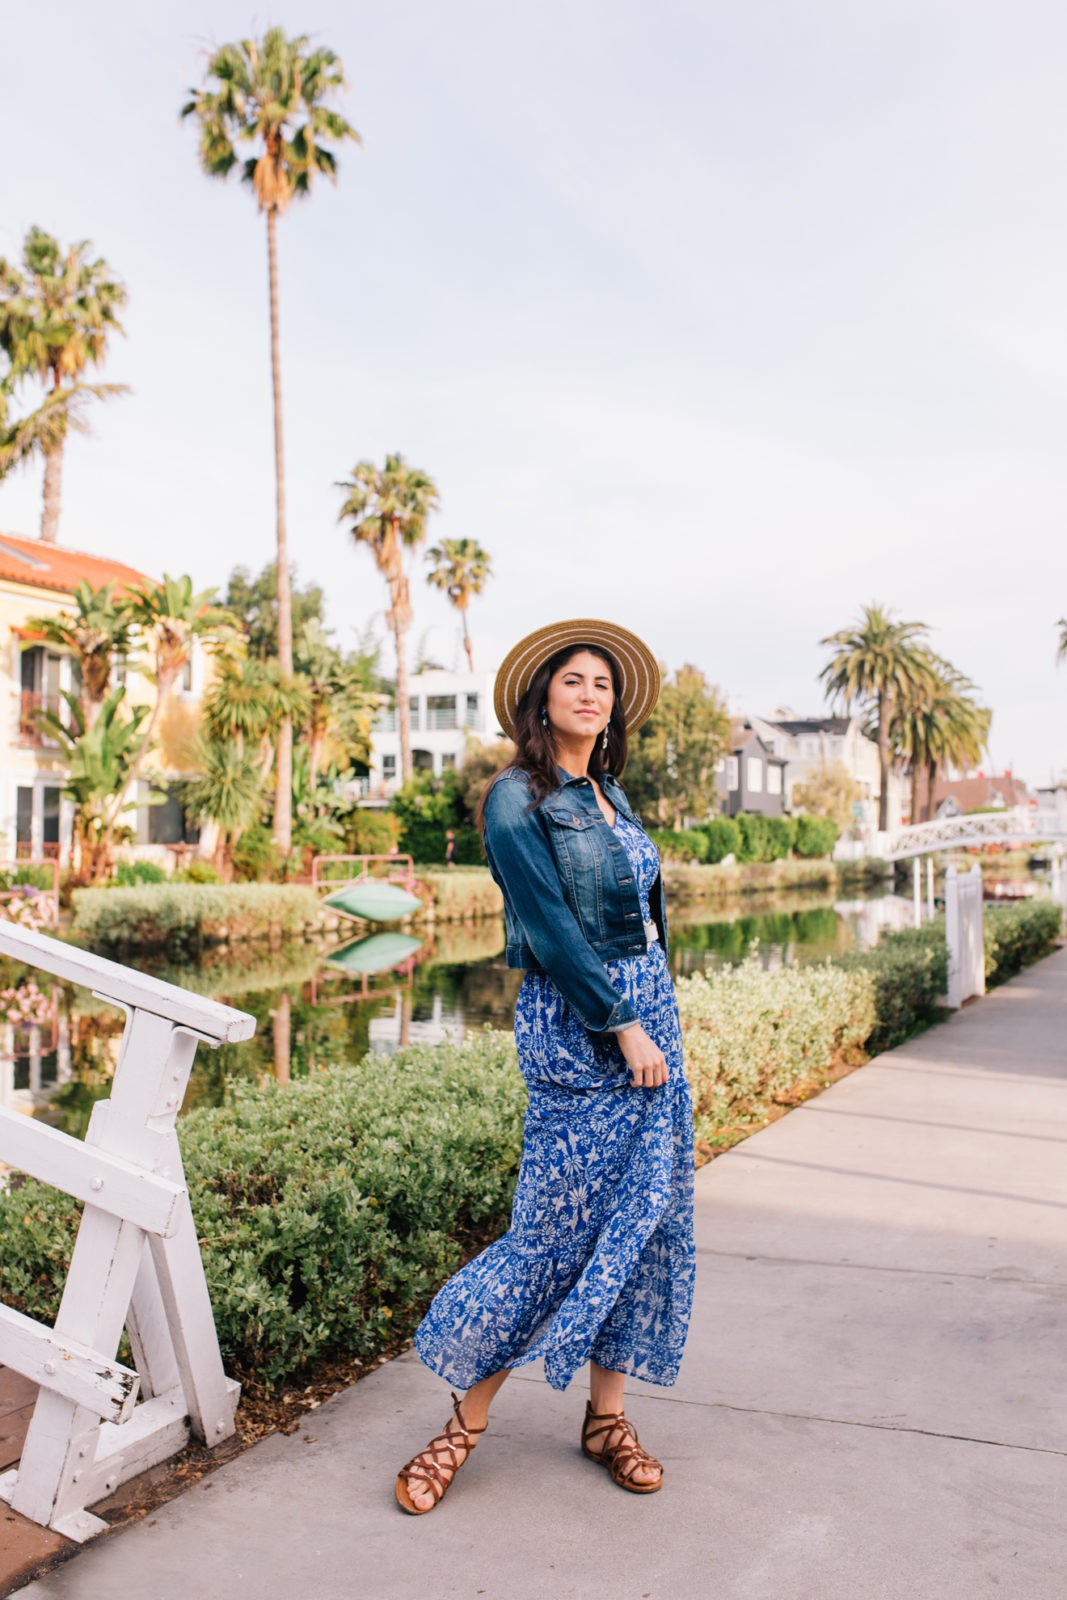 Stage Summer Moments, 2019 Summer Bucket List Moments by popular Los Angeles Lifestyle Blogger Laura Lily: image of woman at Venice, California canals wearing Stage Stores flowing blue and white floral maxi dress, gladiator sandals, cropped jean jacket and straw sun hat. 